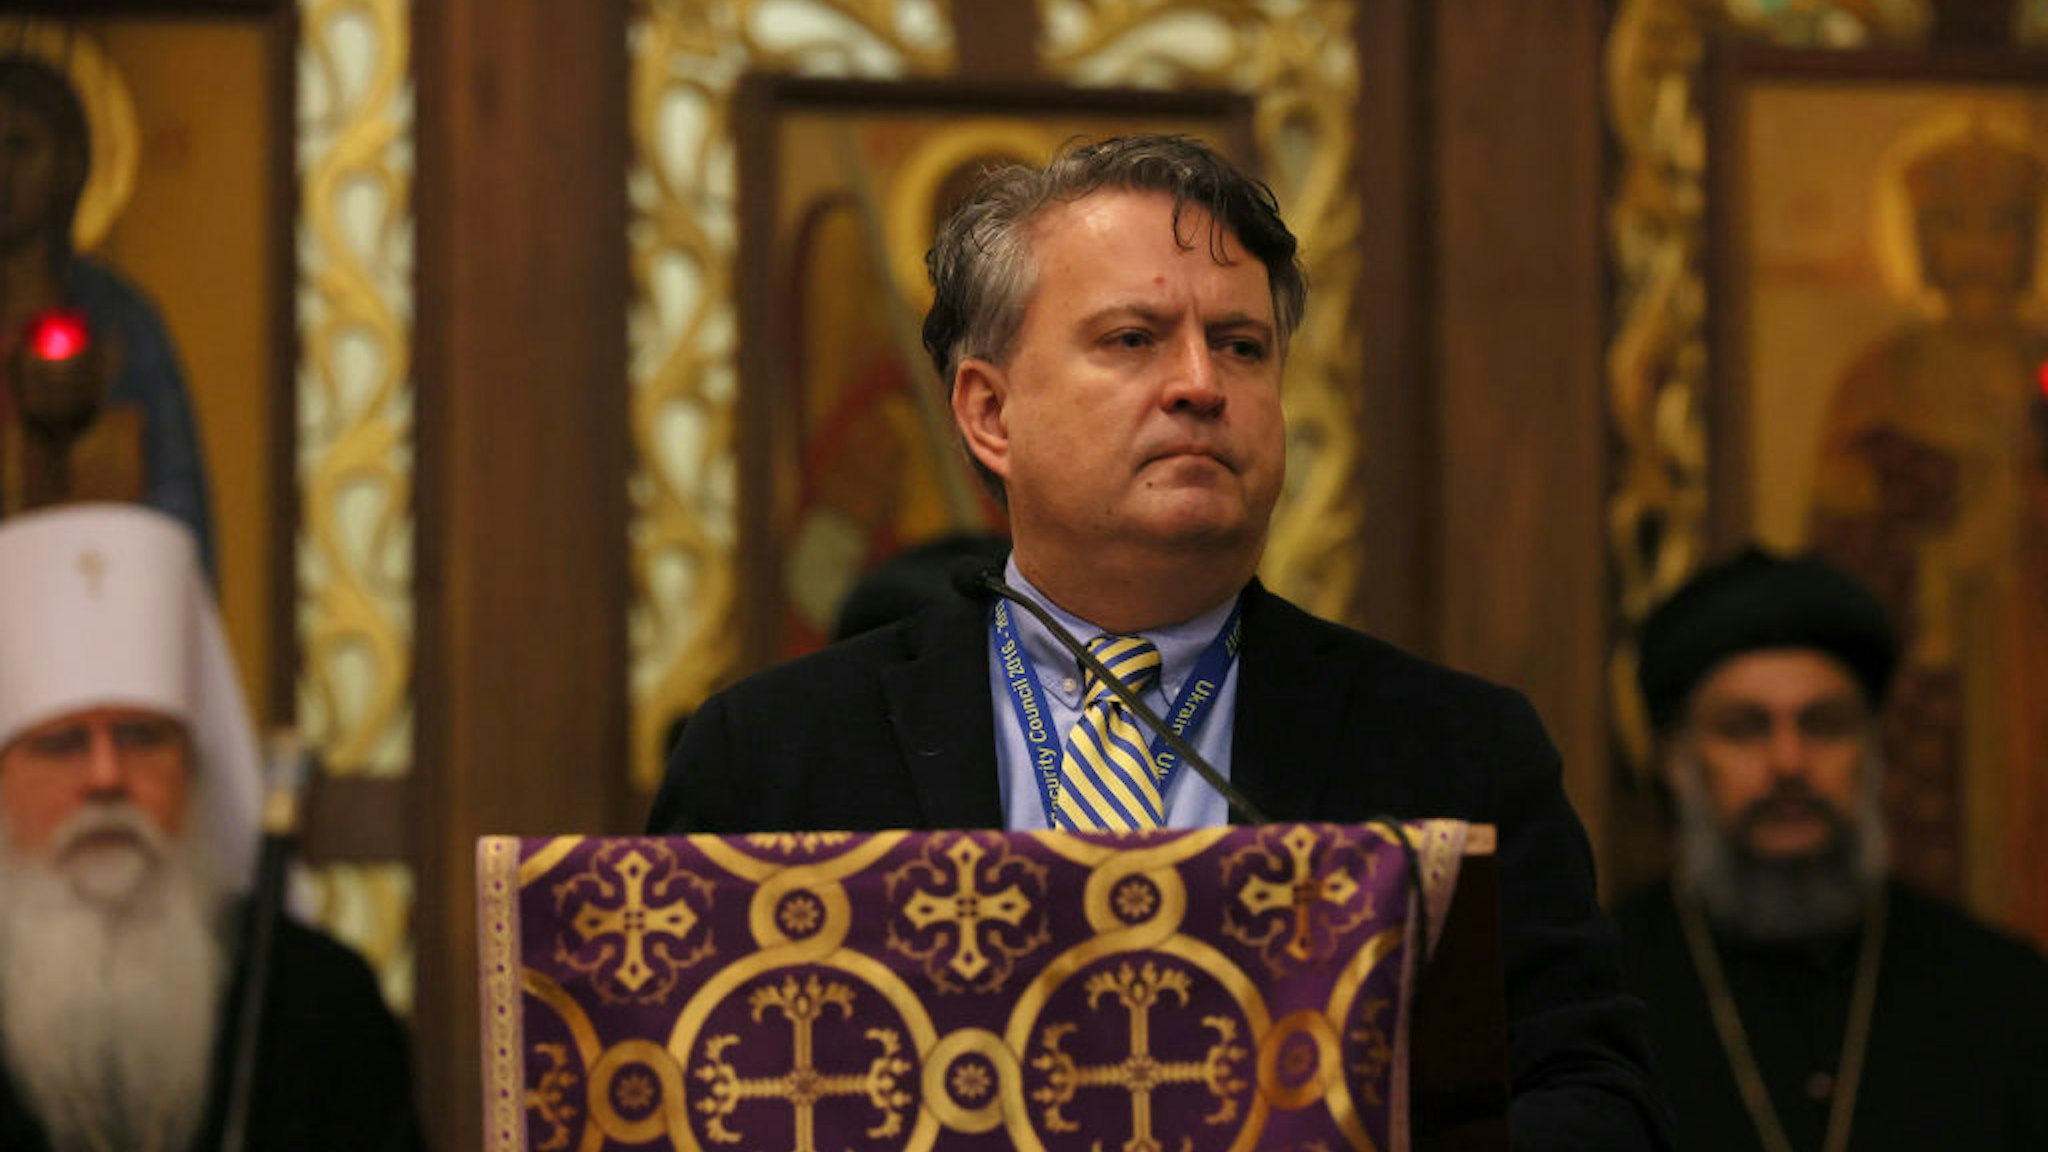 NEW YORK, NEW YORK - MARCH 09: Sergiy Kyslytsya, Permanent Representative of Ukraine to the United Nations, speaks during a prayer service for Ukraine at St.Volodymyr Ukrainian Orthodox Cathedral on March 09, 2022 in New York City. On the 14th day of the Russian invasion of Ukraine, the St.Volodymyr Ukrainian Orthodox Cathedral held prayer vigil attended by the Ukrainian community. Gov. Kathy Hochul, Sergiy Kyslytsya, Permanent Representative of Ukraine to the United Nations, and various religious and community leaders were in attendance. (Photo by Michael M. Santiago/Getty Images)